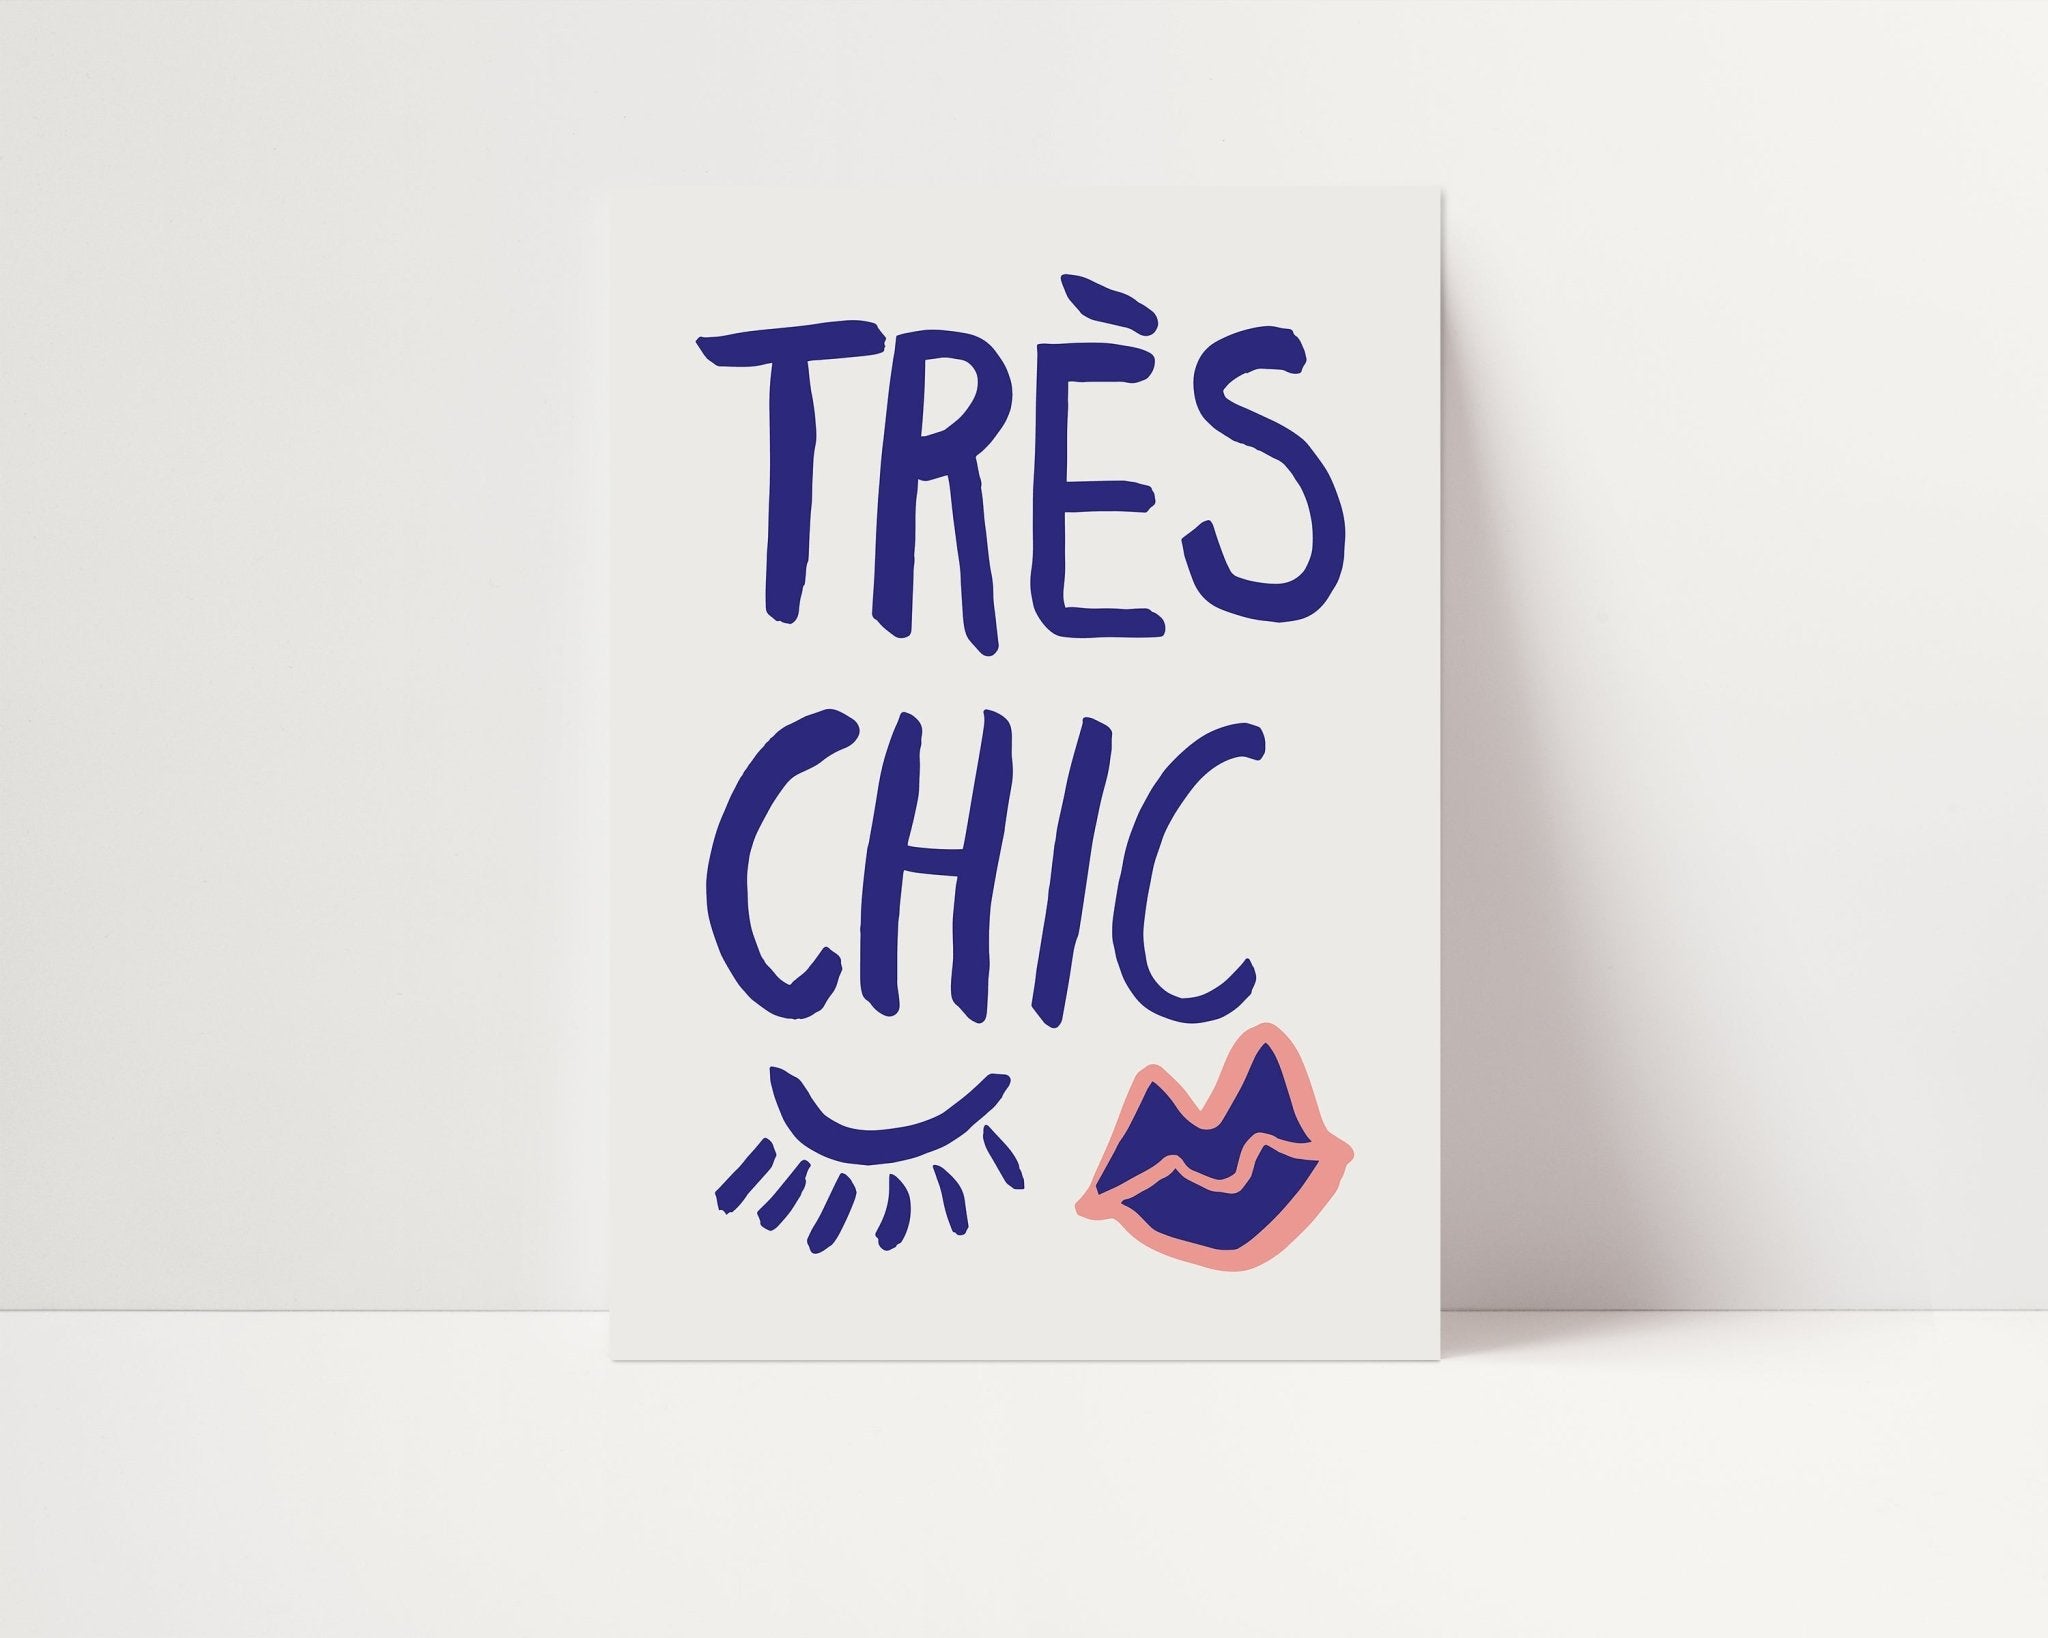 Tres Chic Poster - D'Luxe Prints